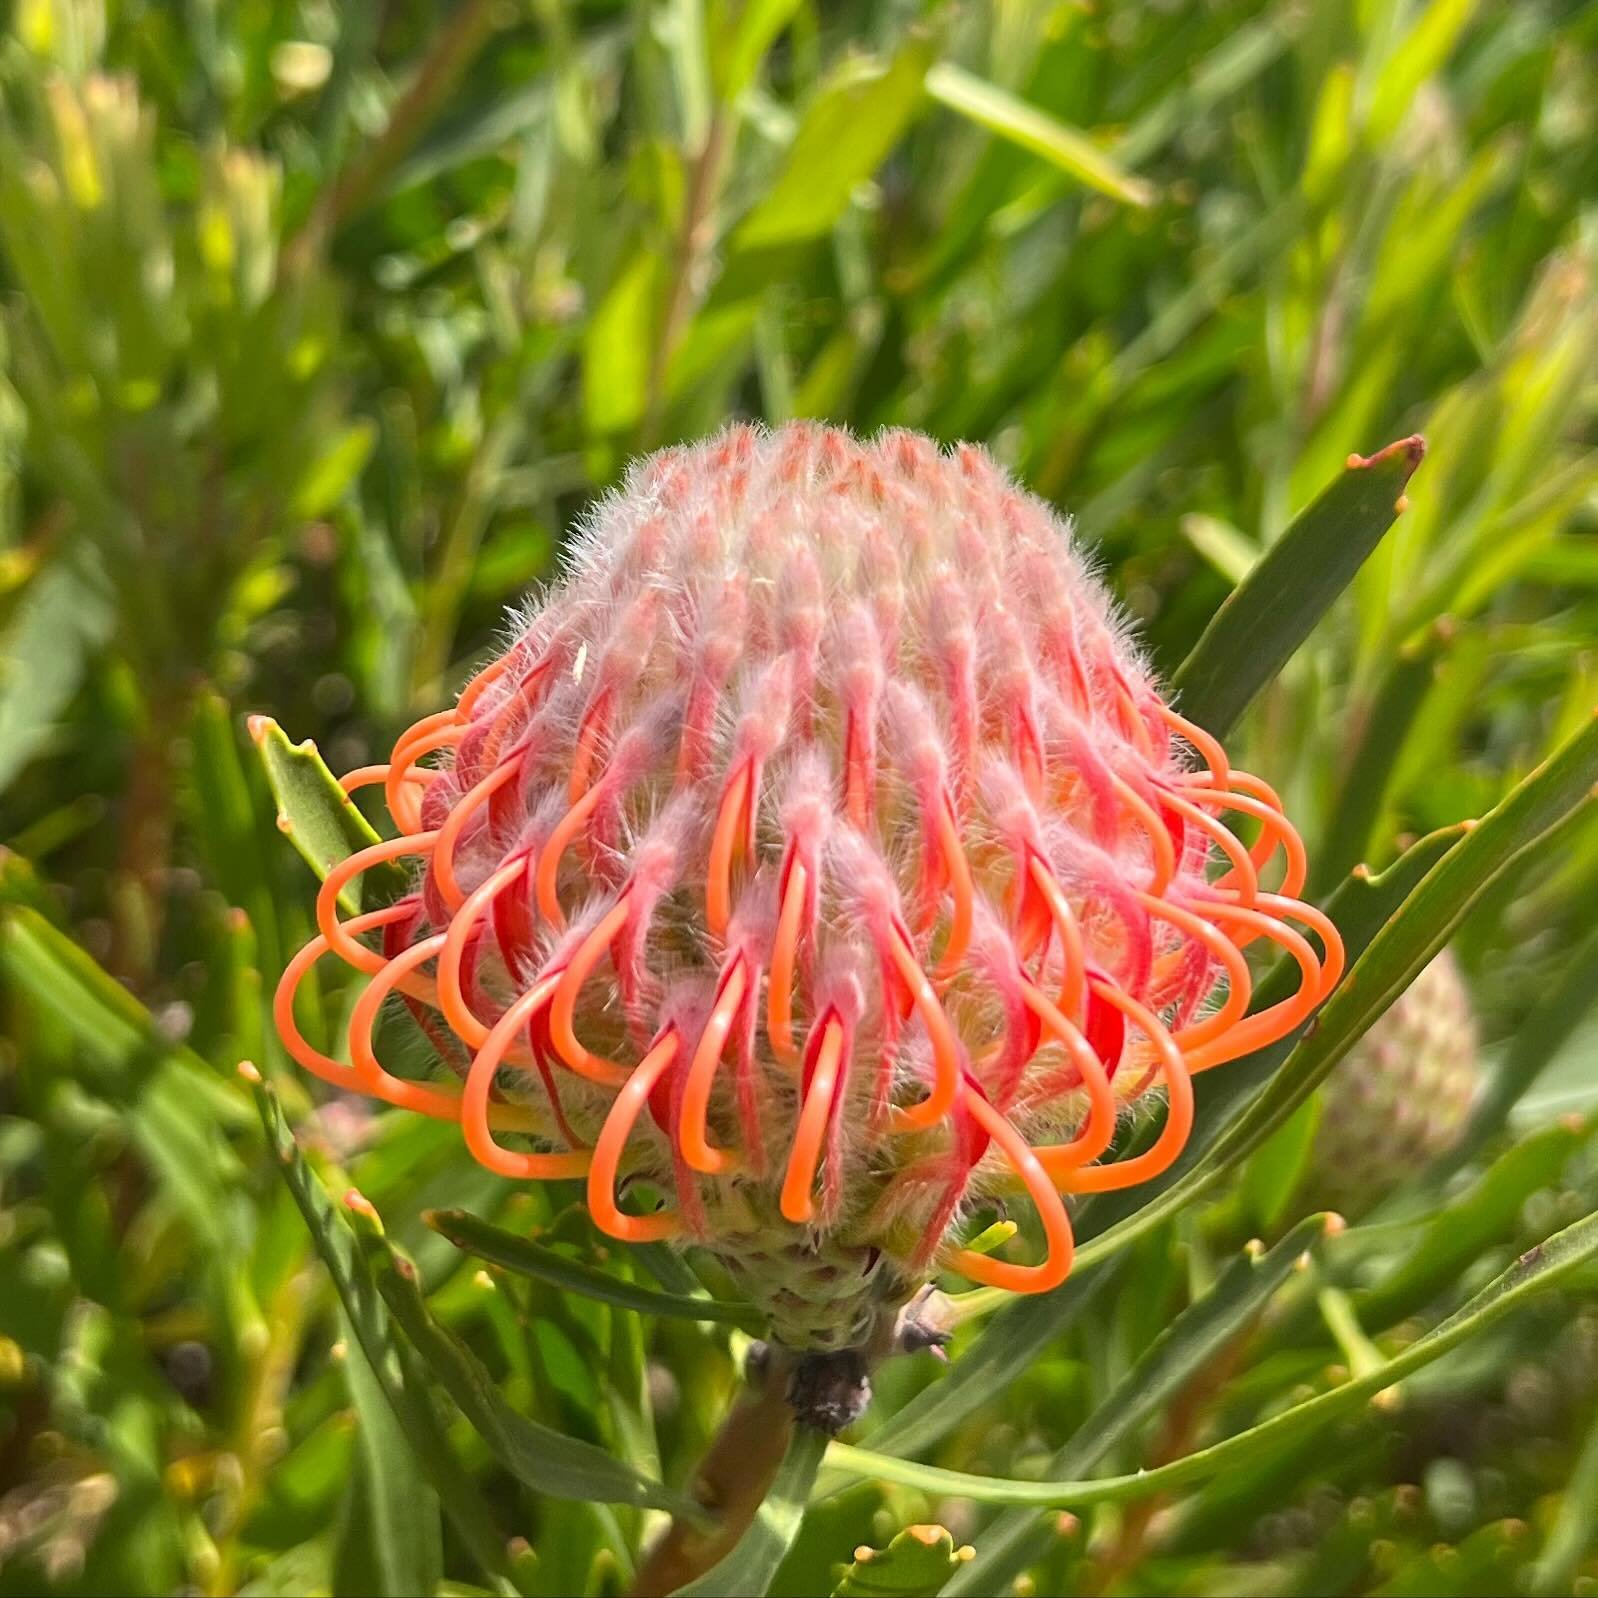 An eye catcher of a pin cushion protea. Our south west region is identical in climate to the Cape Floristic region in South Africa, where the proteas originate from. Visit beautiful local proteas farms on tour.